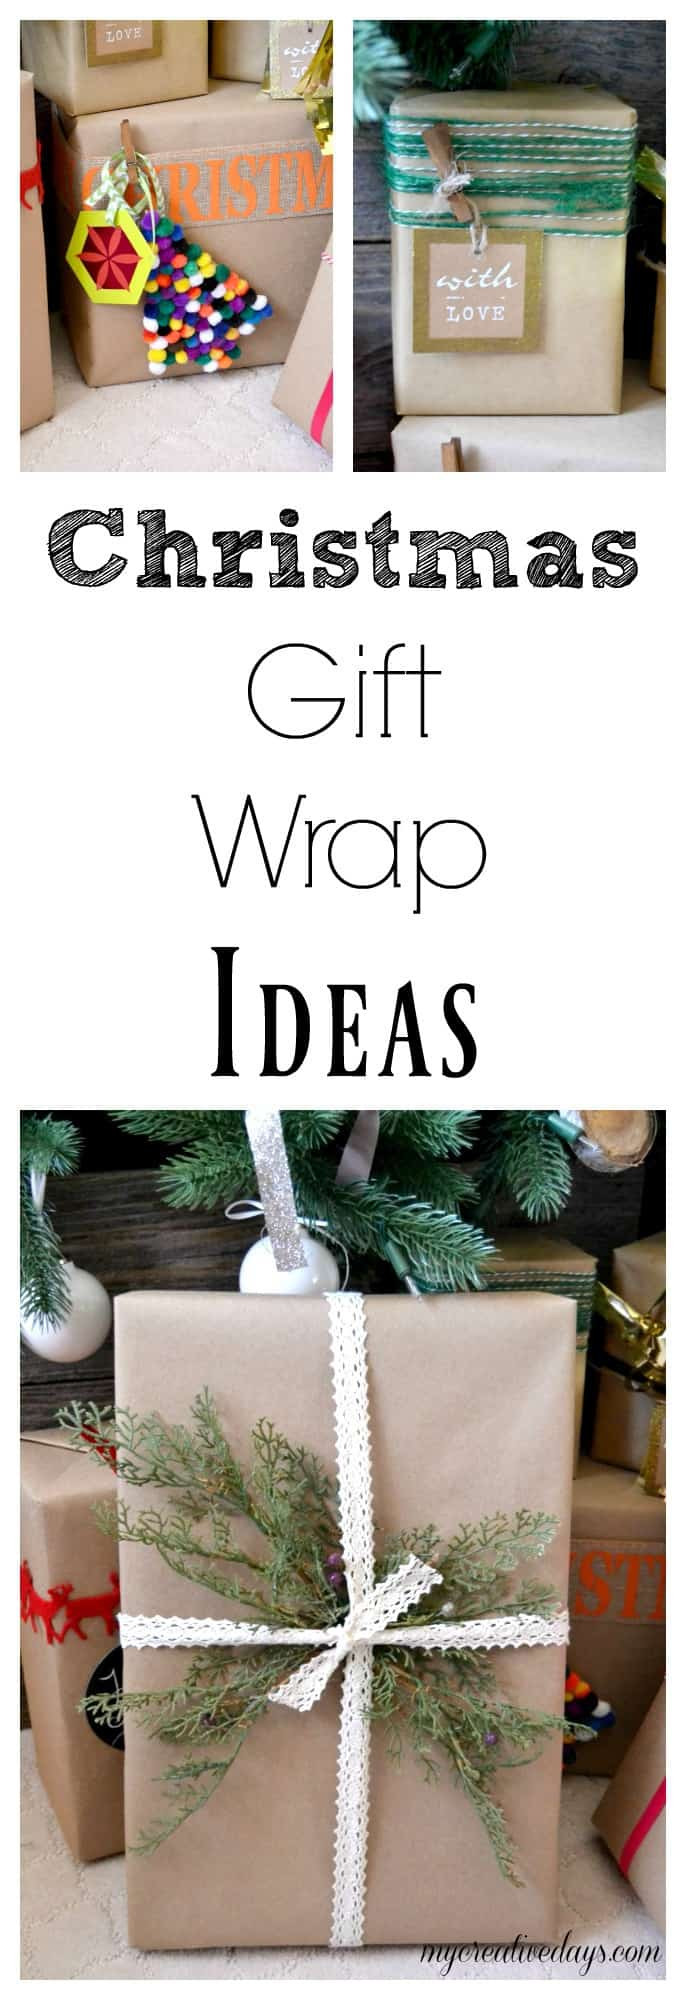 Christmas Gift Wrapping Ideas Pinterest
 Christmas Gift Wrap Ideas For Everyone Your List This Year